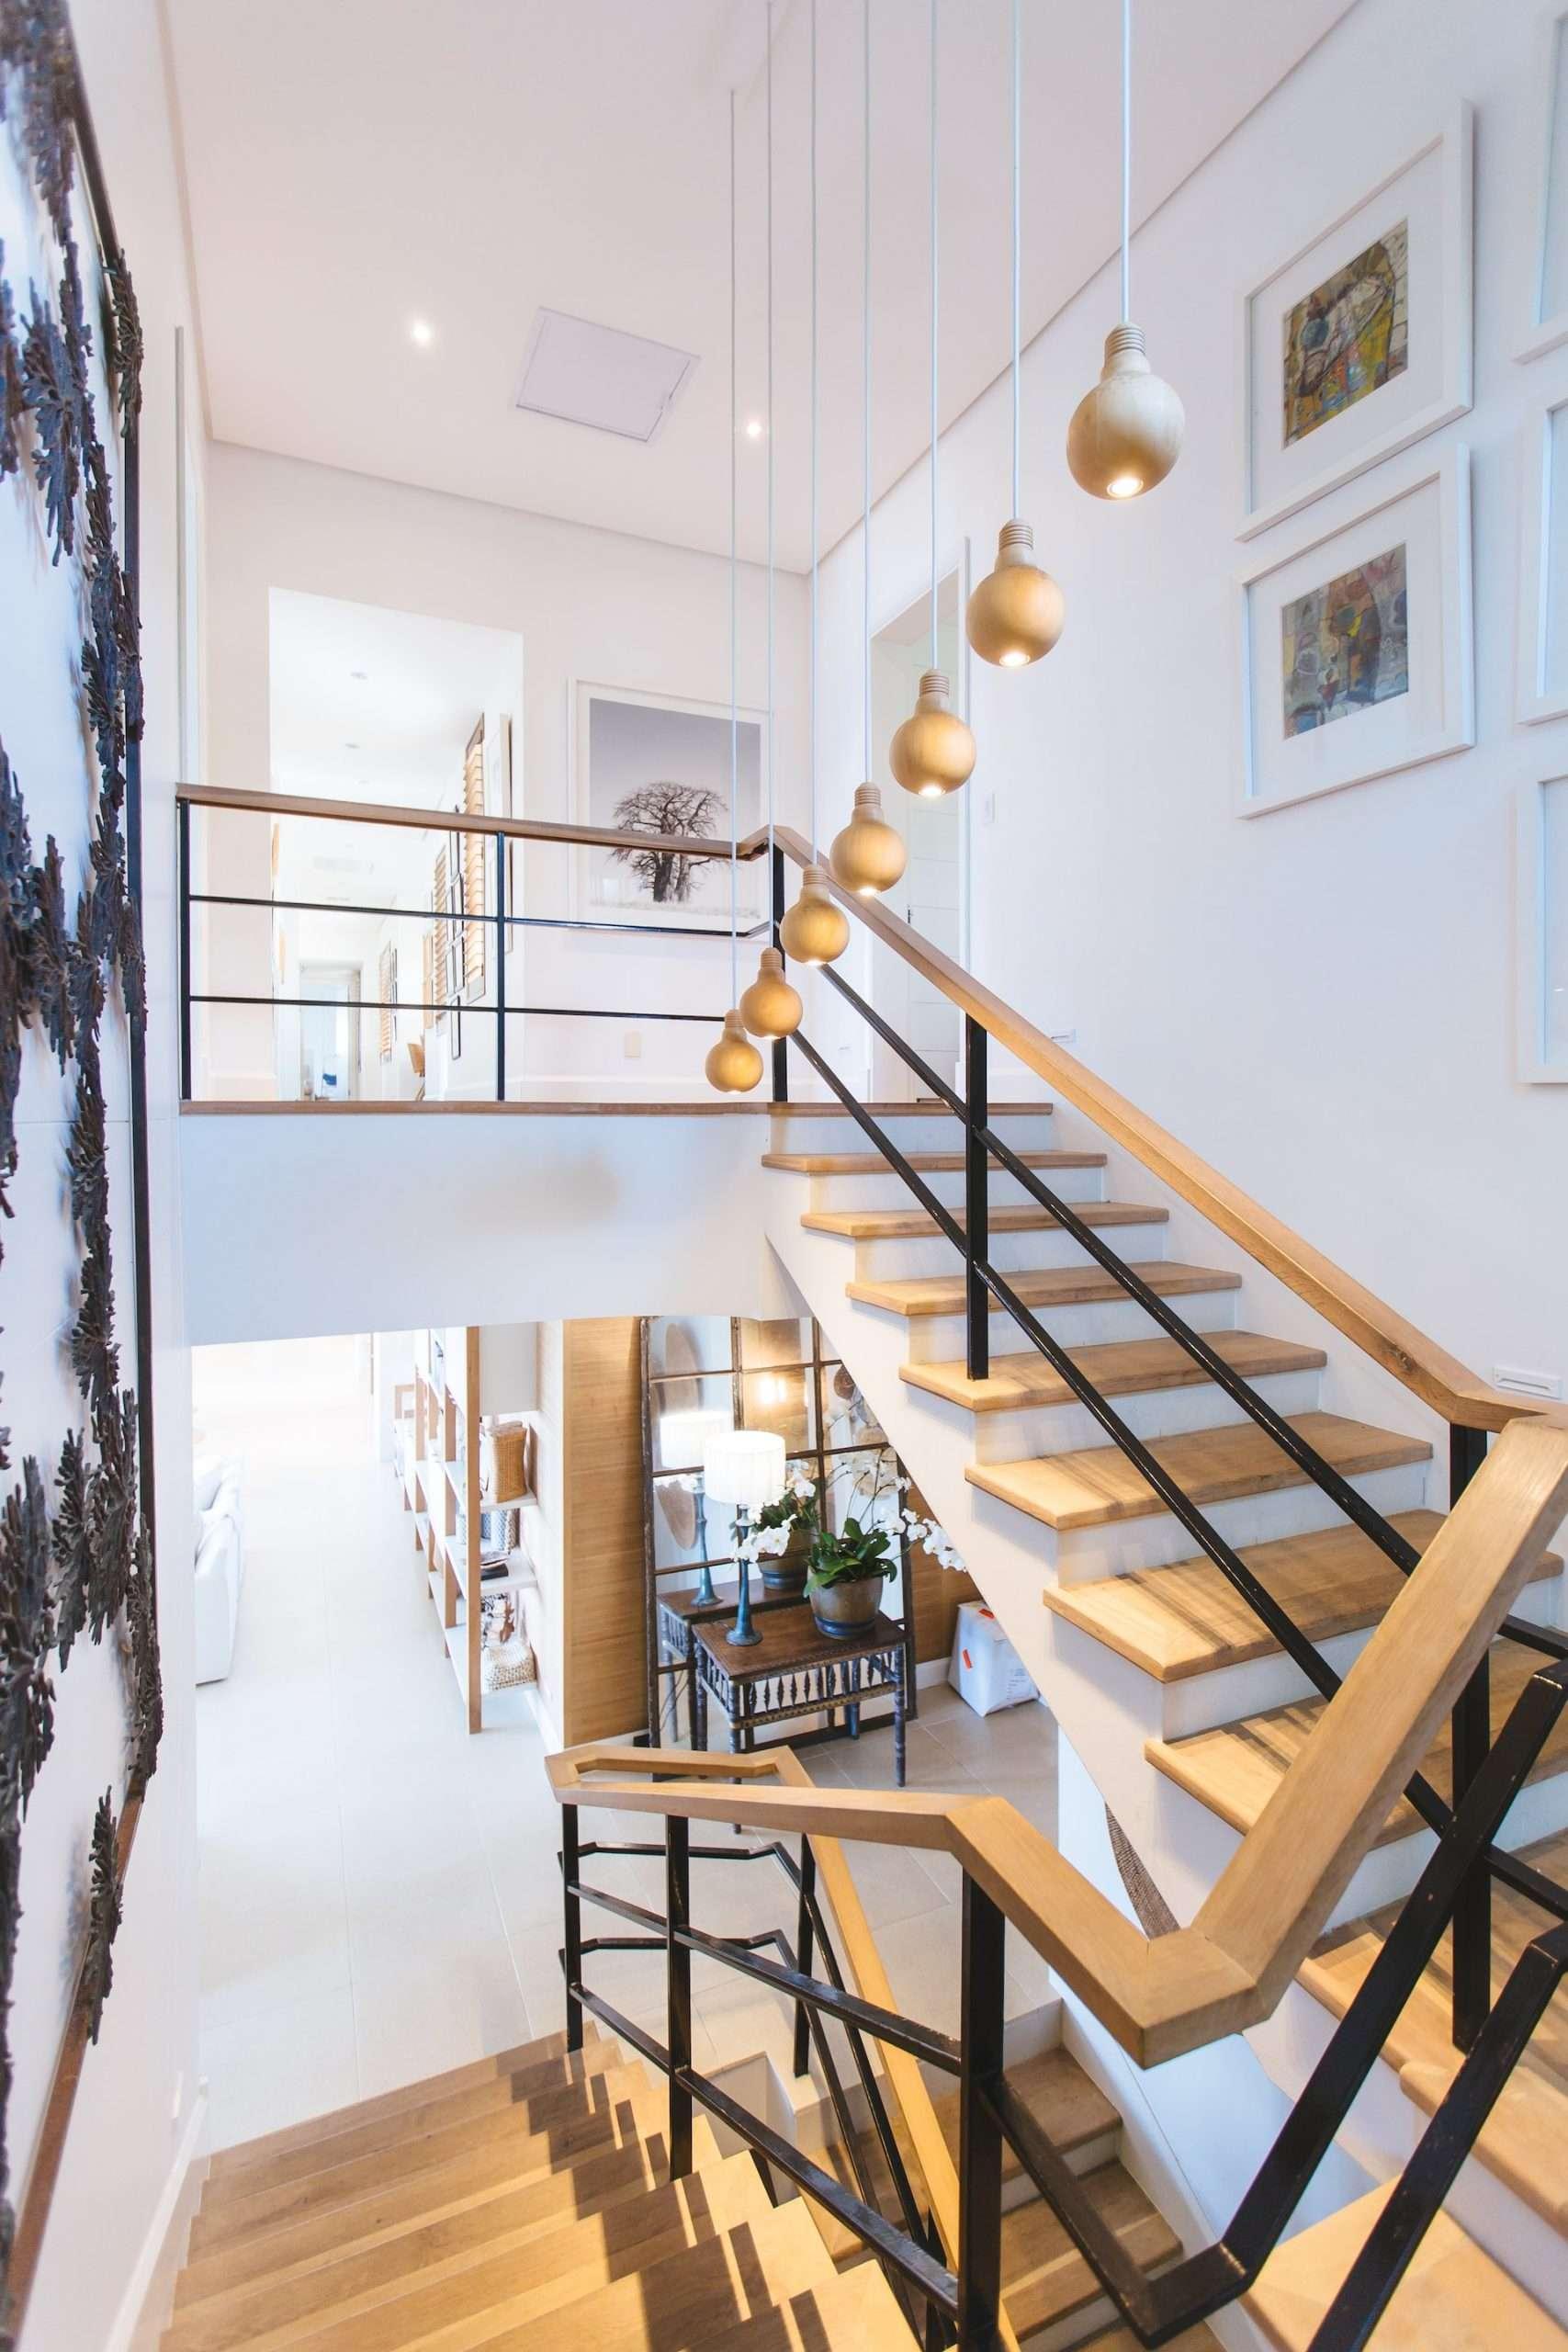 Floating treads get more support with some great staircase design ideas.